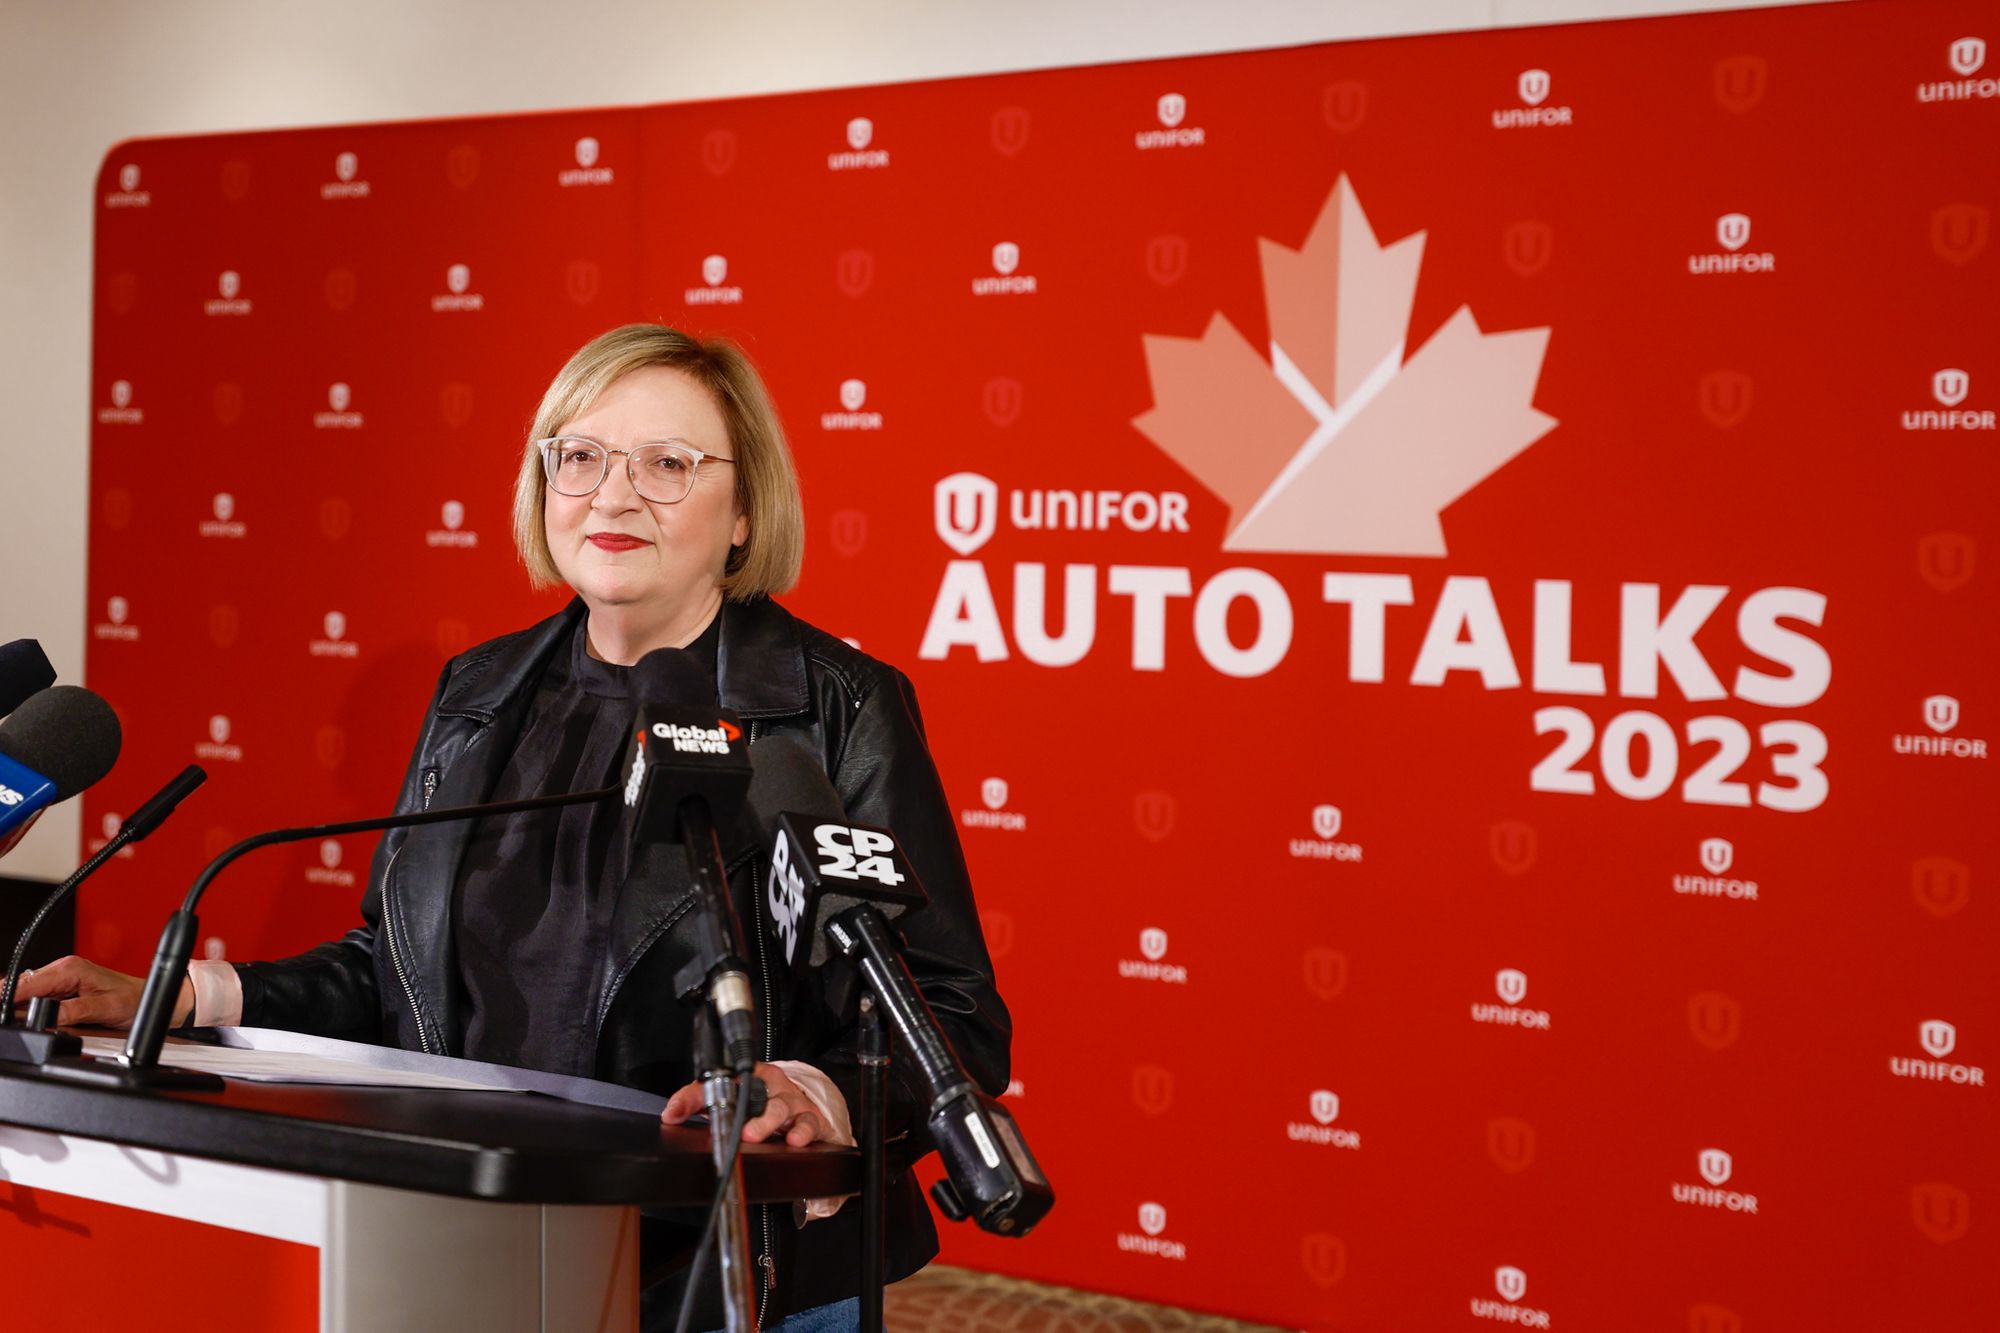 Who Did It Better, United Auto Workers Or Unifor?